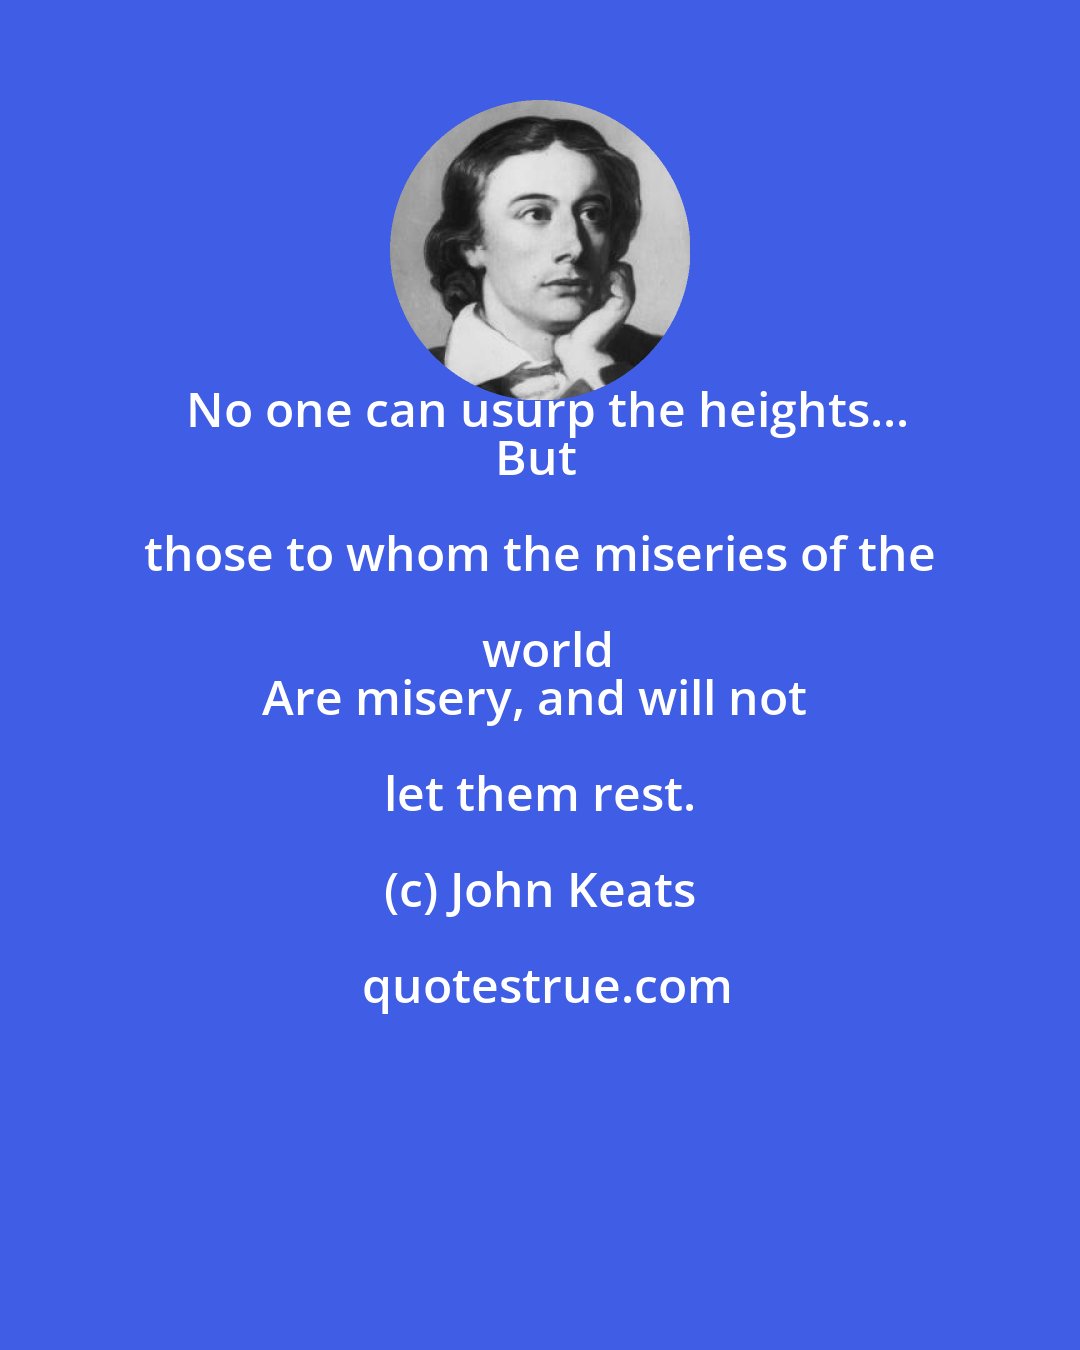 John Keats: No one can usurp the heights...
But those to whom the miseries of the world
Are misery, and will not let them rest.